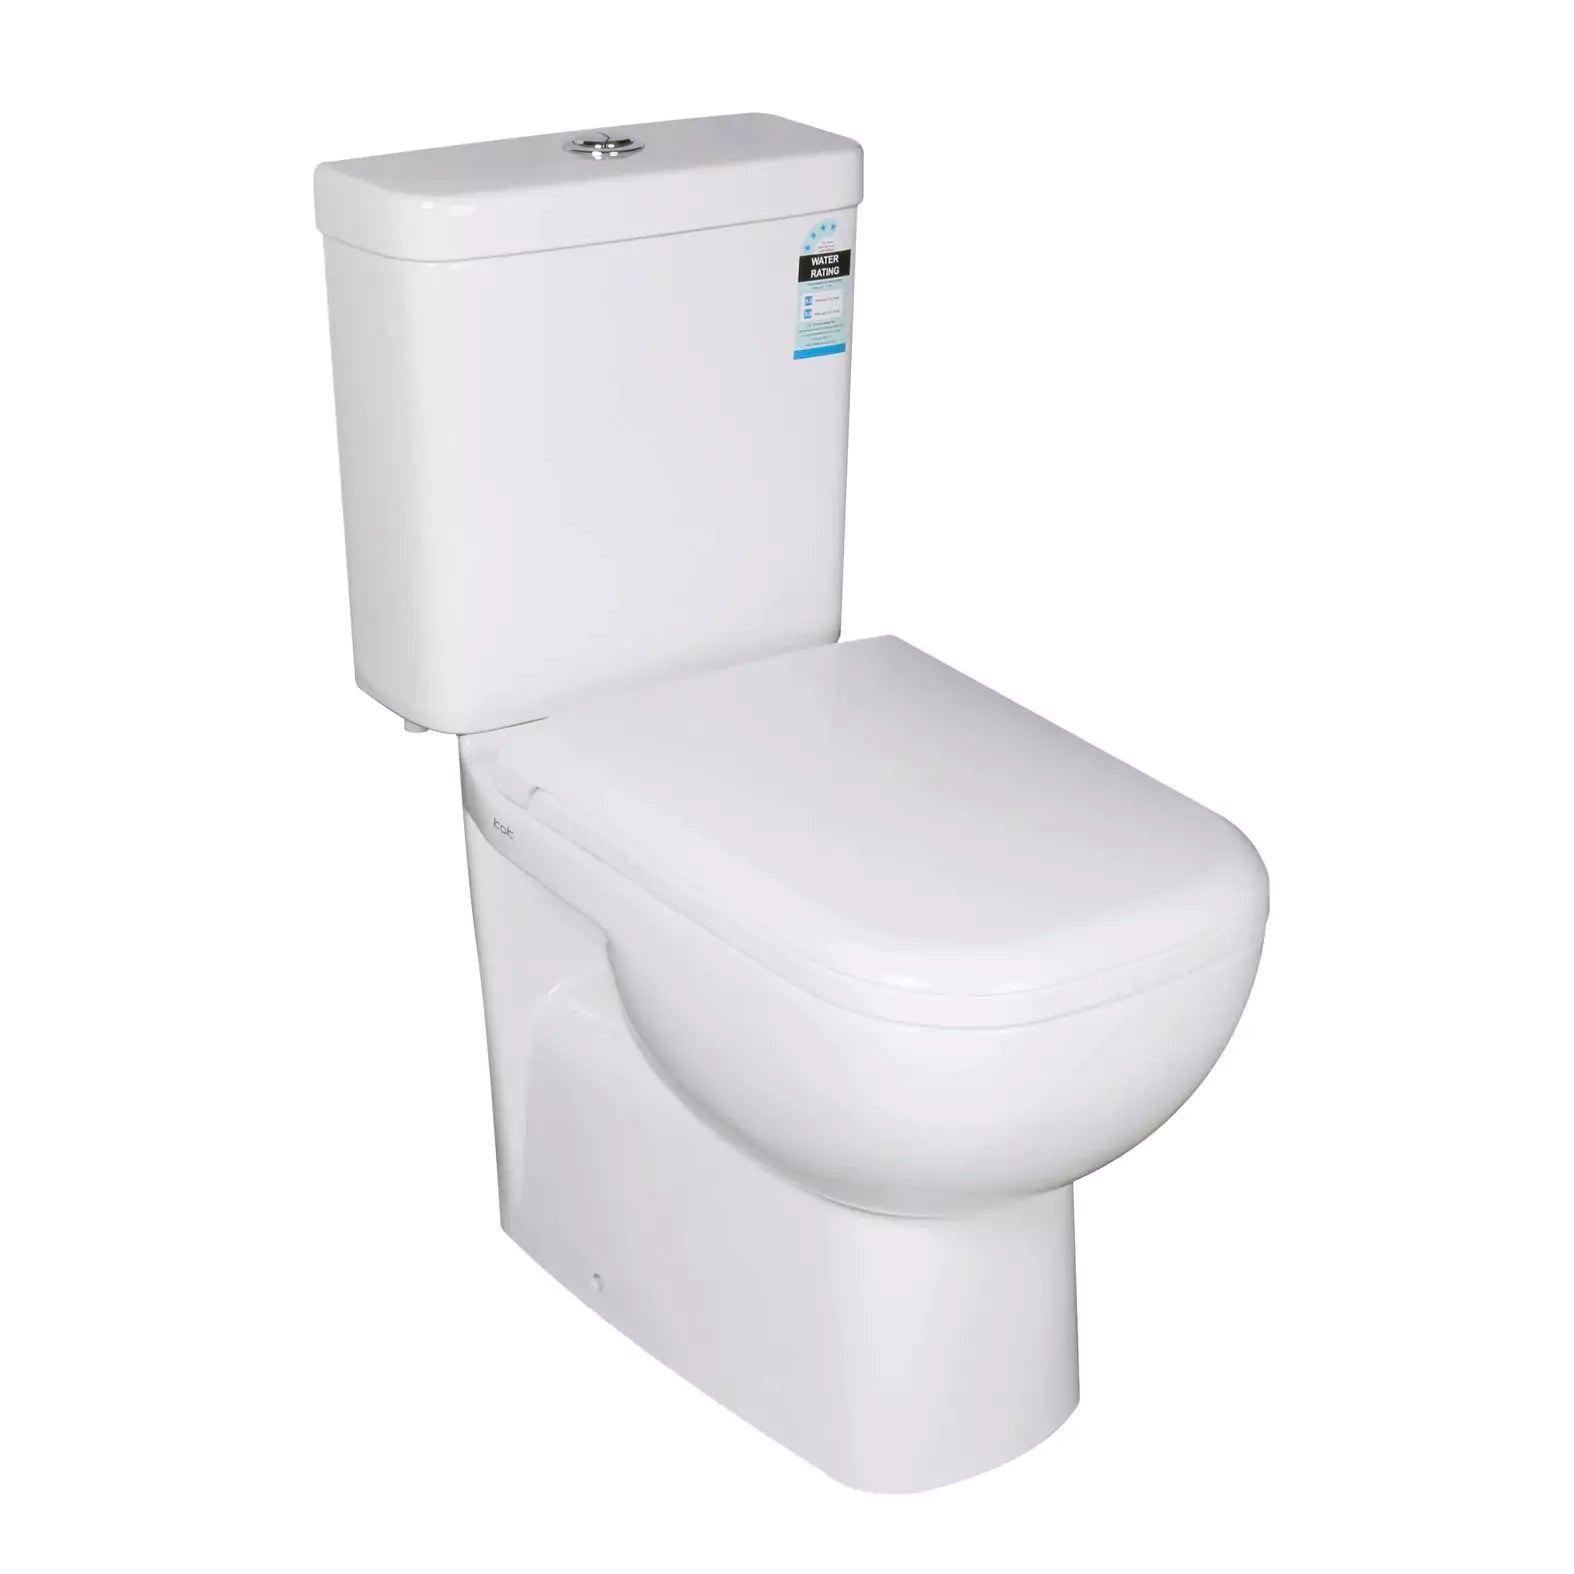 Cubo Closed Couple Toilet Suite: Modern and Sleek Toilet Design with Compact Footprint-Gloss White-KDK006C/KDK006P